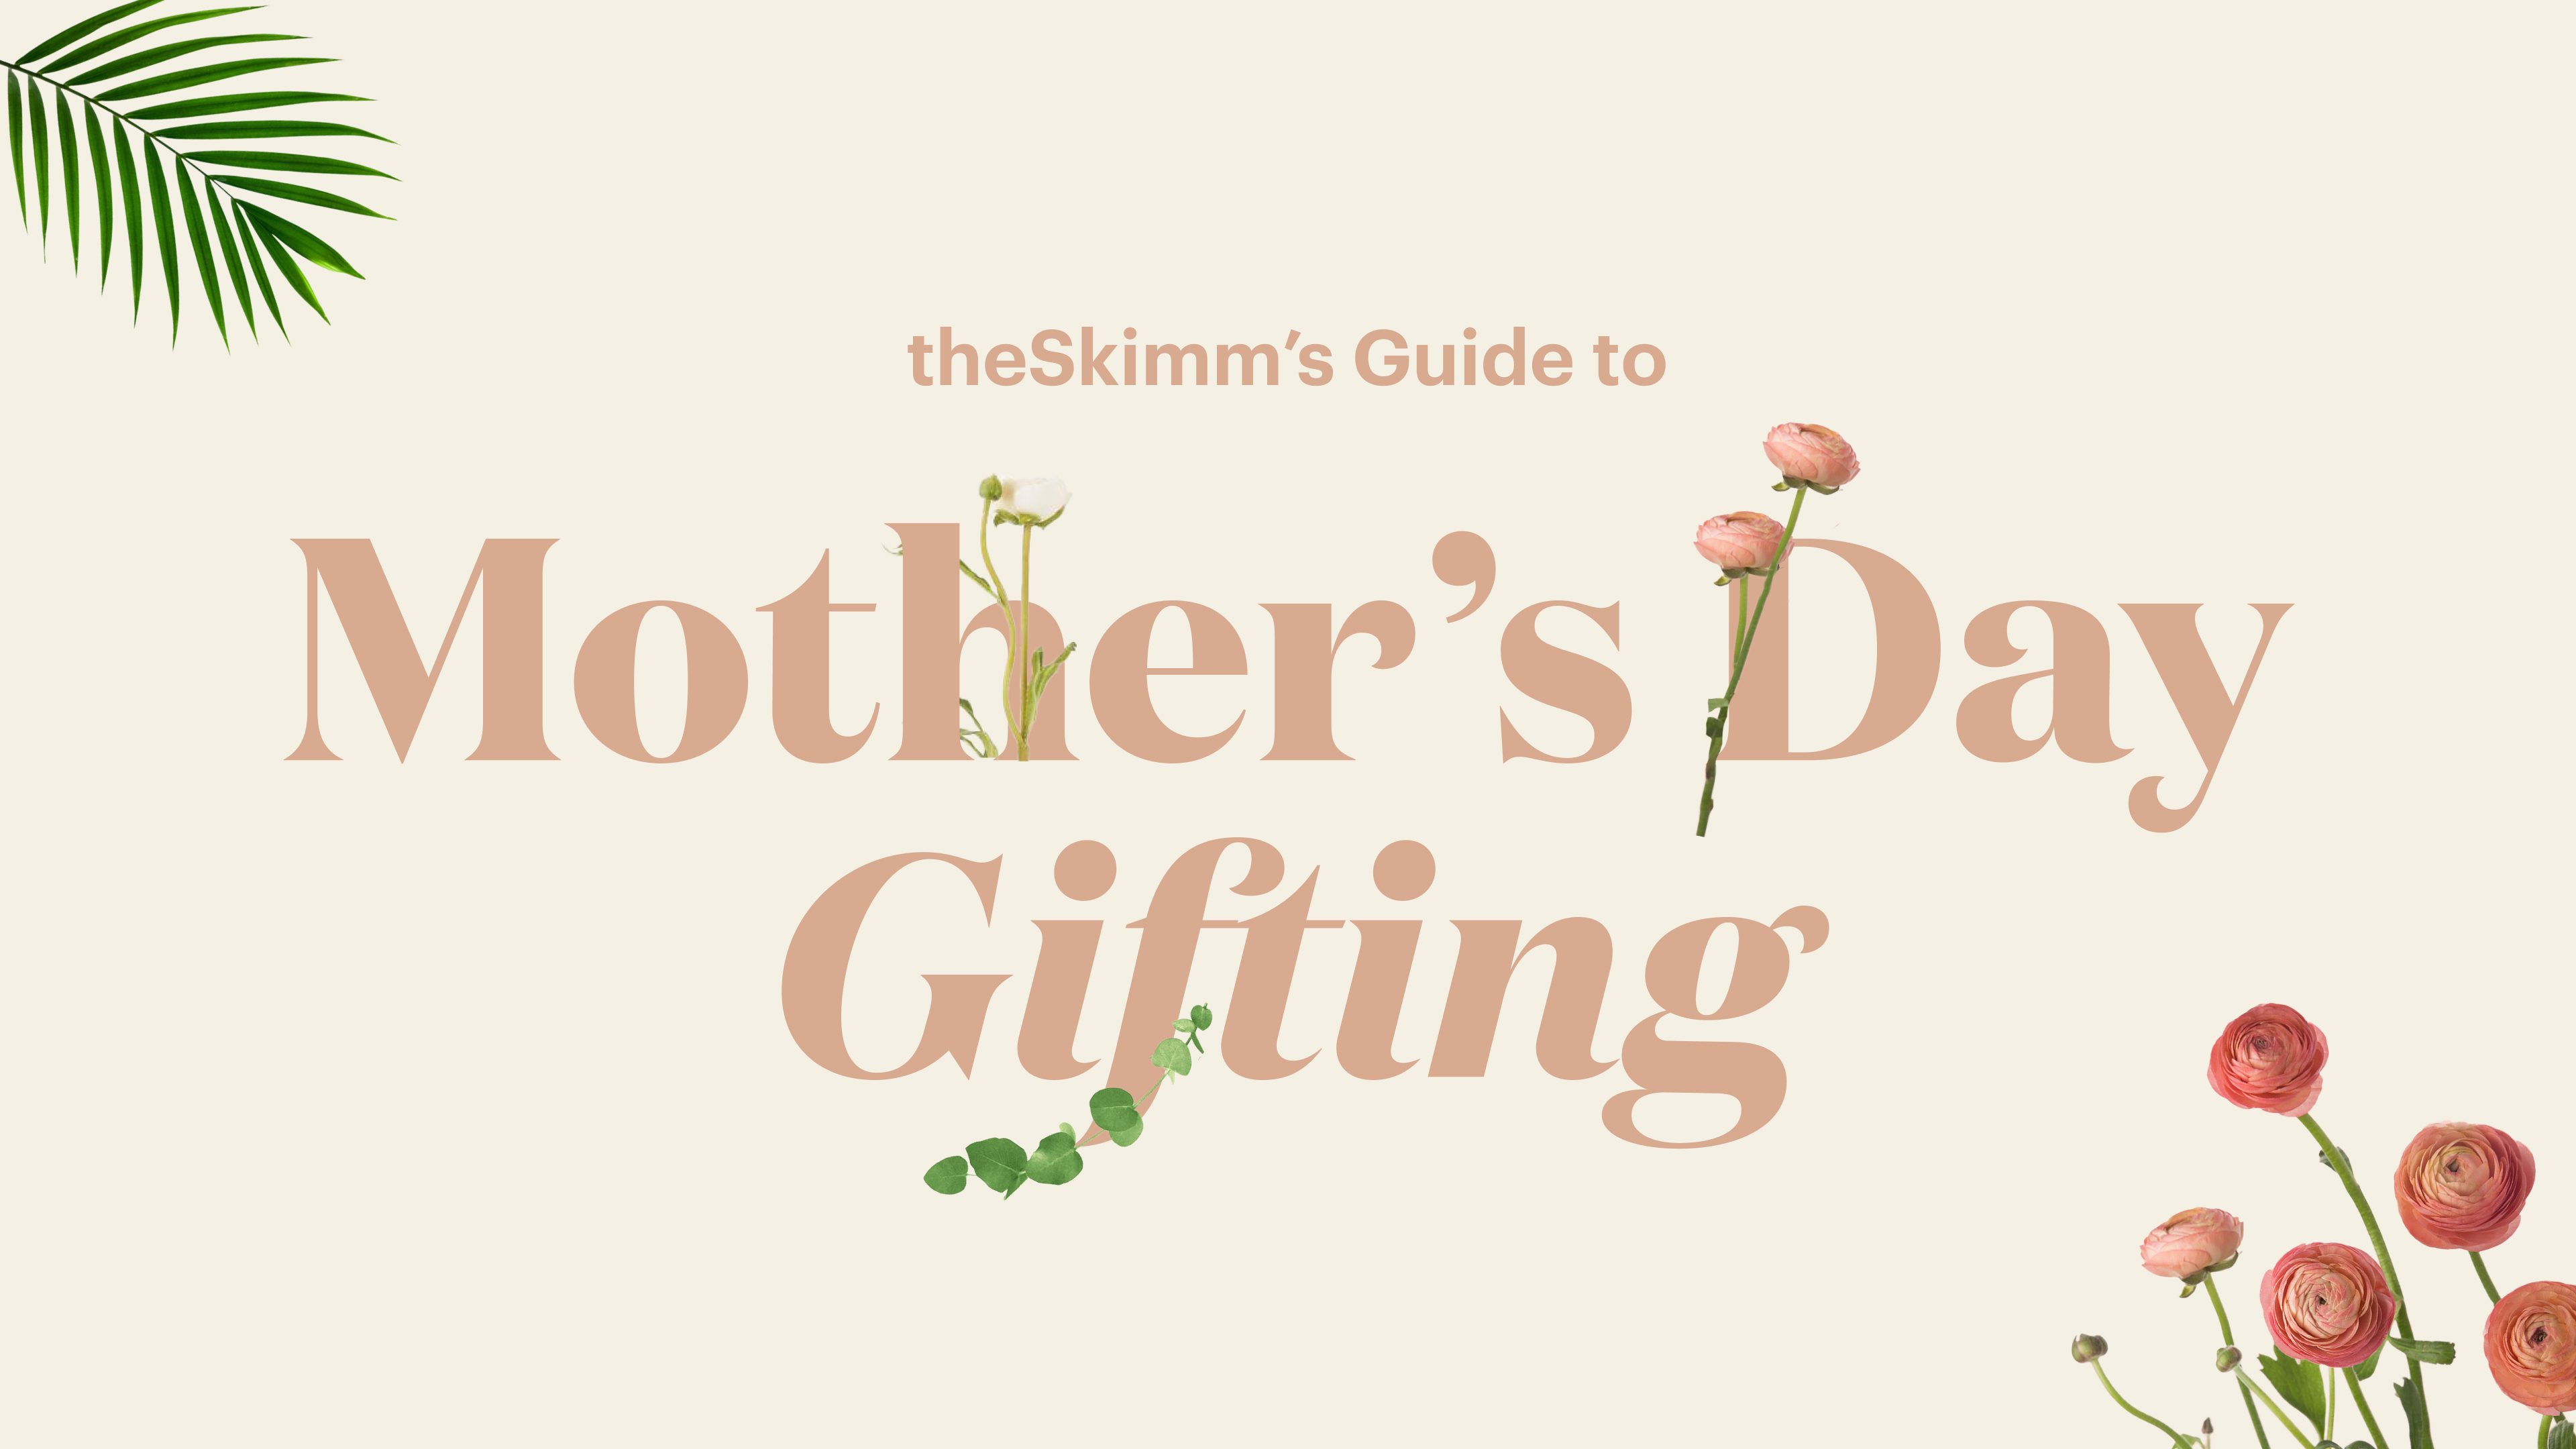 theSkimm's Guide to Mother's Day Gifting